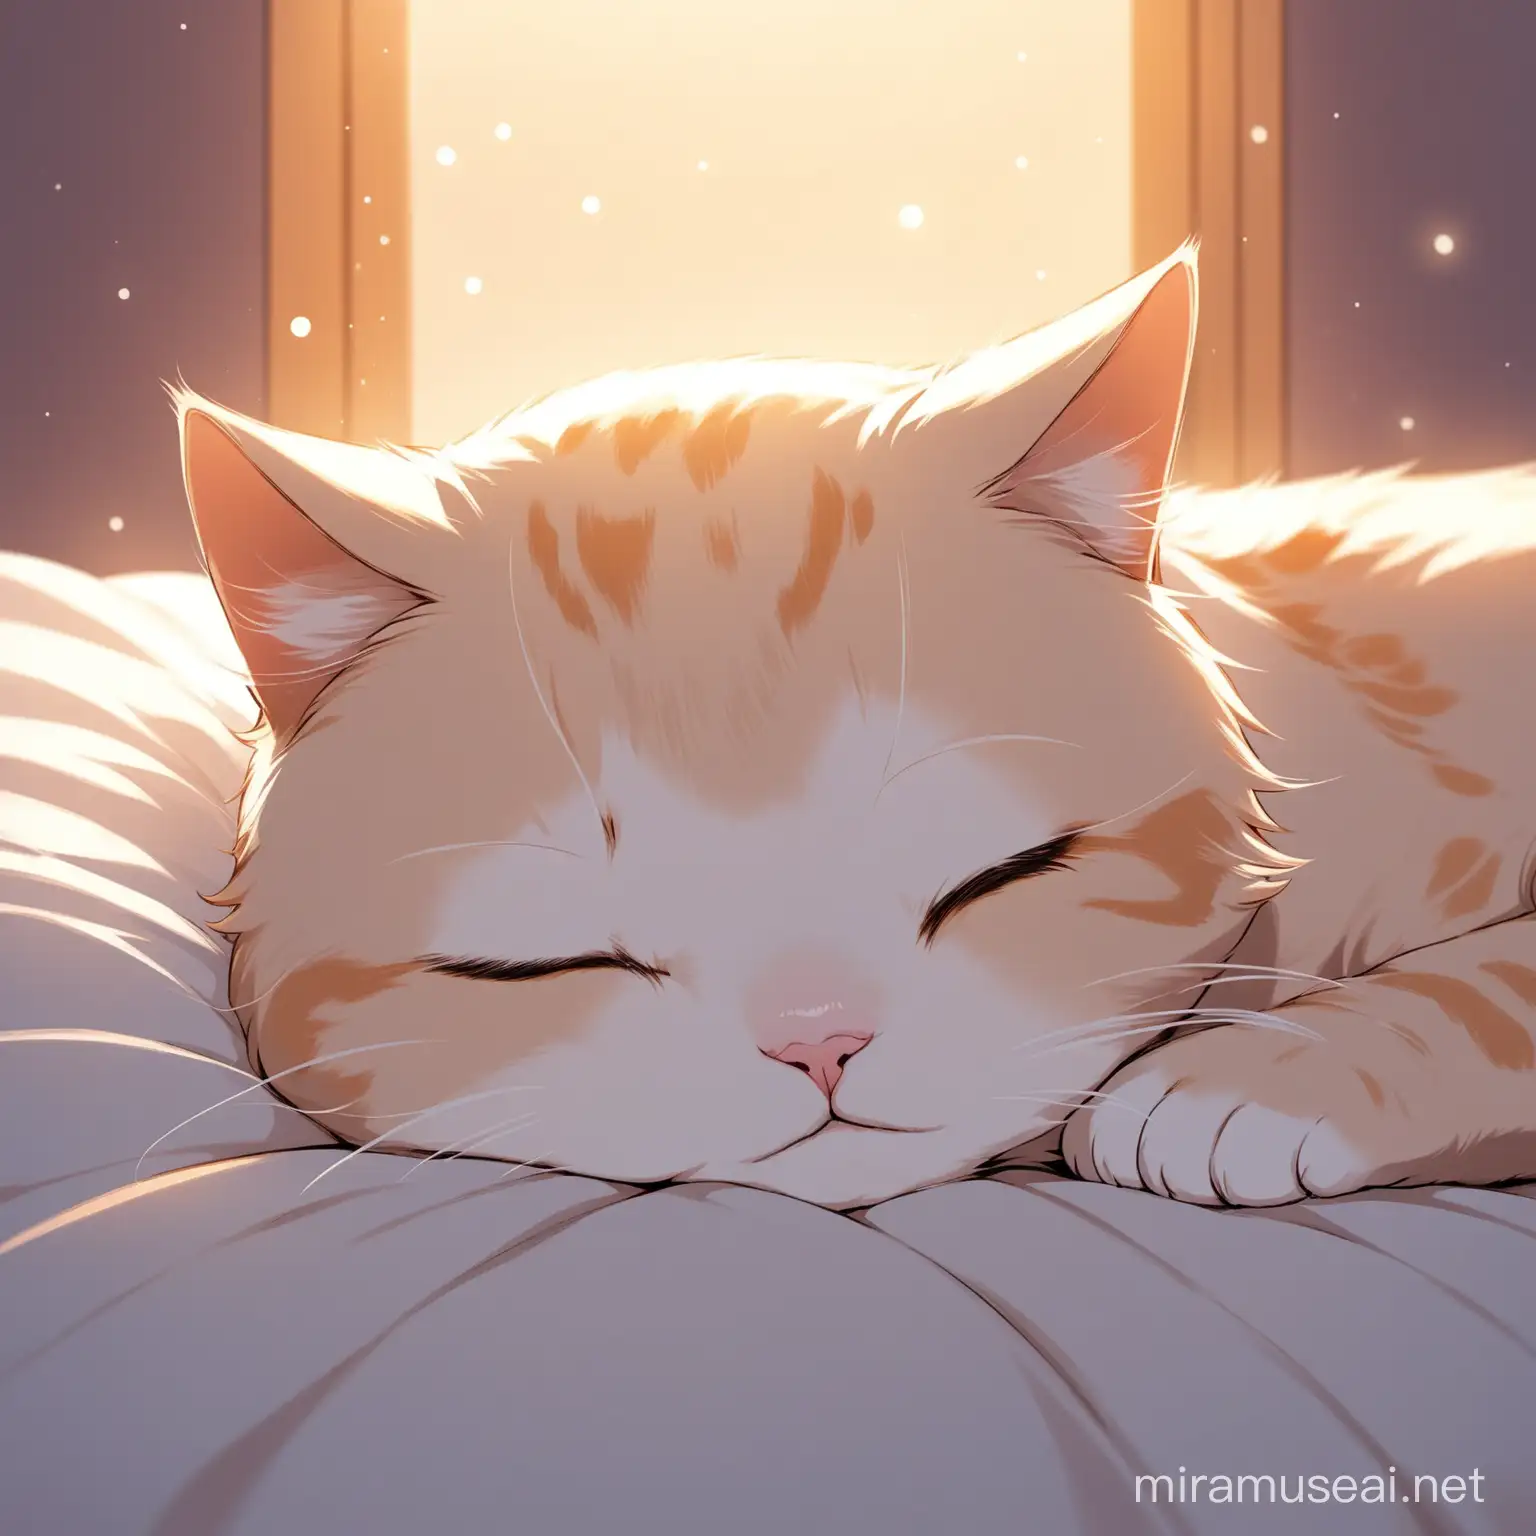 Adorable Cat Sleeping Peacefully on a Cozy Blanket